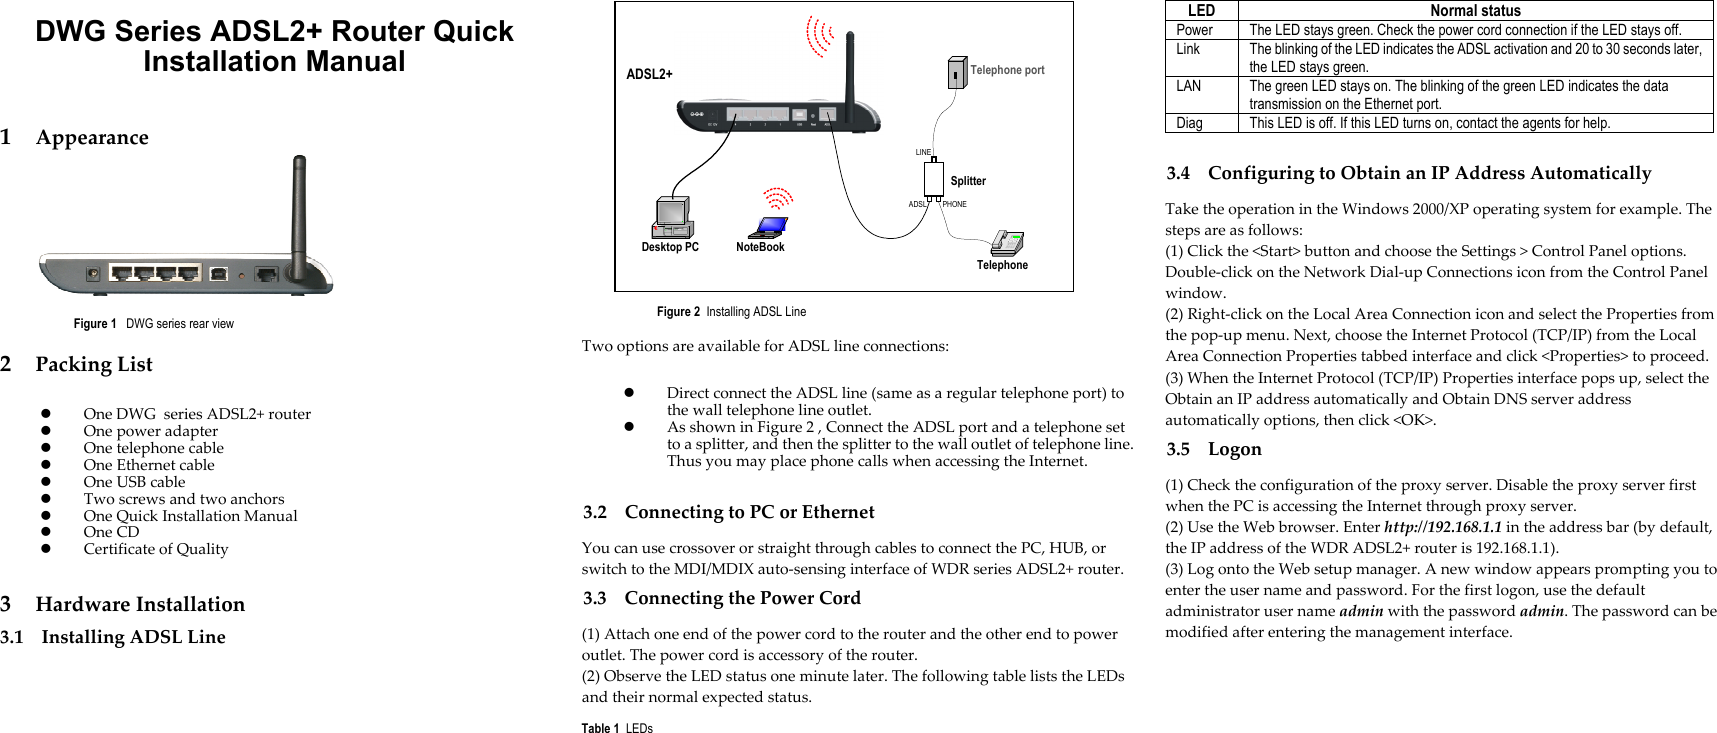 DWG Series ADSL2+ Router Quick Installation Manual   1  Appearance   Figure 1   DWG series rear view  2  Packing List    One DWG  series ADSL2+ router    One power adapter    One telephone cable    One Ethernet cable    One USB cable    Two screws and two anchors    One Quick Installation Manual    One CD    Certificate of Quality 3  Hardware Installation  3.1  Installing ADSL Line   Figure 2  Installing ADSL Line Two options are available for ADSL line connections:    Direct connect the ADSL line (same as a regular telephone port) to the wall telephone line outlet.    As shown in Figure 2 , Connect the ADSL port and a telephone set to a splitter, and then the splitter to the wall outlet of telephone line. Thus you may place phone calls when accessing the Internet. 3.2  Connecting to PC or Ethernet  You can use crossover or straight through cables to connect the PC, HUB, or switch to the MDI/MDIX auto-sensing interface of WDR series ADSL2+ router.  3.3  Connecting the Power Cord  (1) Attach one end of the power cord to the router and the other end to power outlet. The power cord is accessory of the router. (2) Observe the LED status one minute later. The following table lists the LEDs and their normal expected status.  Table 1  LEDs  LED   Normal status Power  The LED stays green. Check the power cord connection if the LED stays off.  Link  The blinking of the LED indicates the ADSL activation and 20 to 30 seconds later, the LED stays green. LAN  The green LED stays on. The blinking of the green LED indicates the data transmission on the Ethernet port.  Diag  This LED is off. If this LED turns on, contact the agents for help.   3.4  Configuring to Obtain an IP Address Automatically  Take the operation in the Windows 2000/XP operating system for example. The steps are as follows: (1) Click the &lt;Start&gt; button and choose the Settings &gt; Control Panel options. Double-click on the Network Dial-up Connections icon from the Control Panel window.  (2) Right-click on the Local Area Connection icon and select the Properties from the pop-up menu. Next, choose the Internet Protocol (TCP/IP) from the Local Area Connection Properties tabbed interface and click &lt;Properties&gt; to proceed.  (3) When the Internet Protocol (TCP/IP) Properties interface pops up, select the Obtain an IP address automatically and Obtain DNS server address automatically options, then click &lt;OK&gt;.  3.5 Logon  (1) Check the configuration of the proxy server. Disable the proxy server first when the PC is accessing the Internet through proxy server.  (2) Use the Web browser. Enter http://192.168.1.1 in the address bar (by default, the IP address of the WDR ADSL2+ router is 192.168.1.1).  (3) Log onto the Web setup manager. A new window appears prompting you to enter the user name and password. For the first logon, use the default administrator user name admin with the password admin. The password can be modified after entering the management interface.  TelephoneDesktop PCTelephone portADSL2+ Wireless RouterNoteBookSplitterLINEADSL PHONE